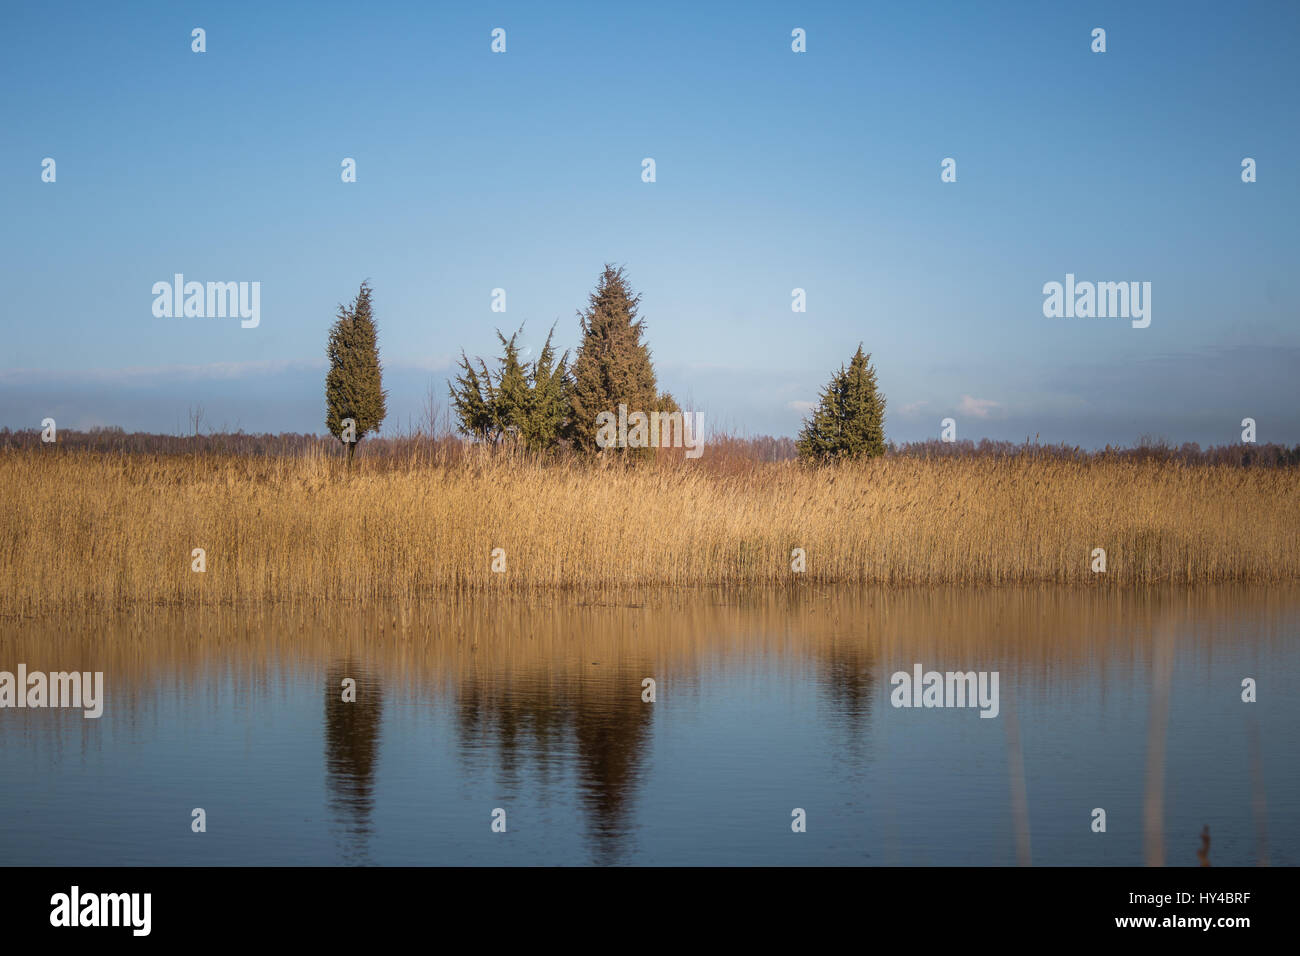 A beautiful early spring landscape with juniper trees at the lake Stock Photo